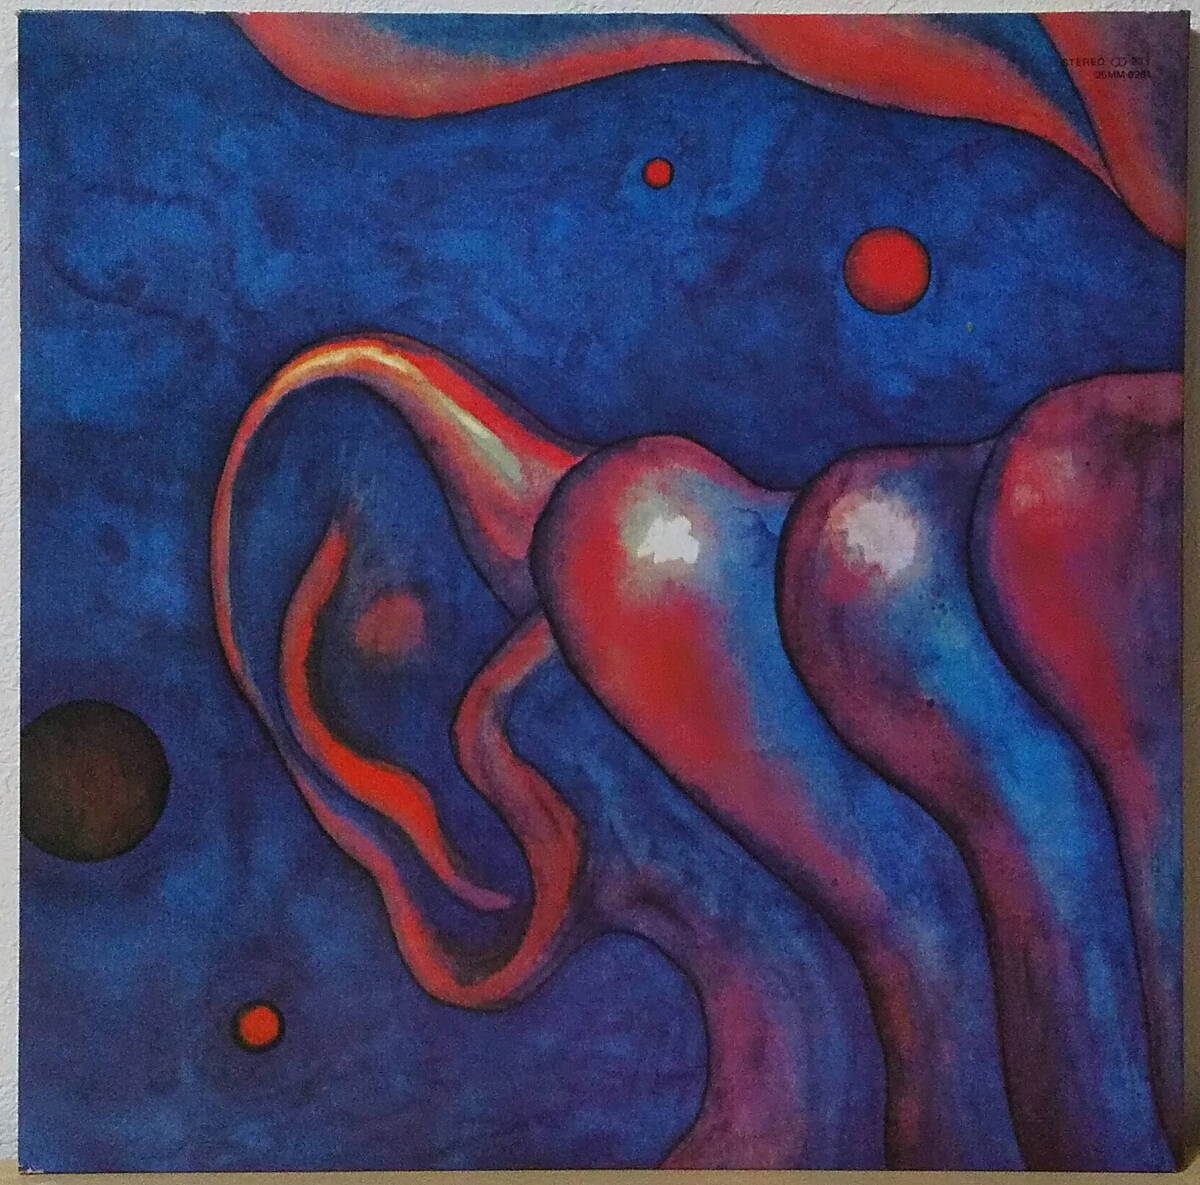 King Crimson - [帯付] In The Court Of The Crimson King (An Observation By King Crimson) 国内盤 LP Polydor - 25MM 0261 1983年_画像2